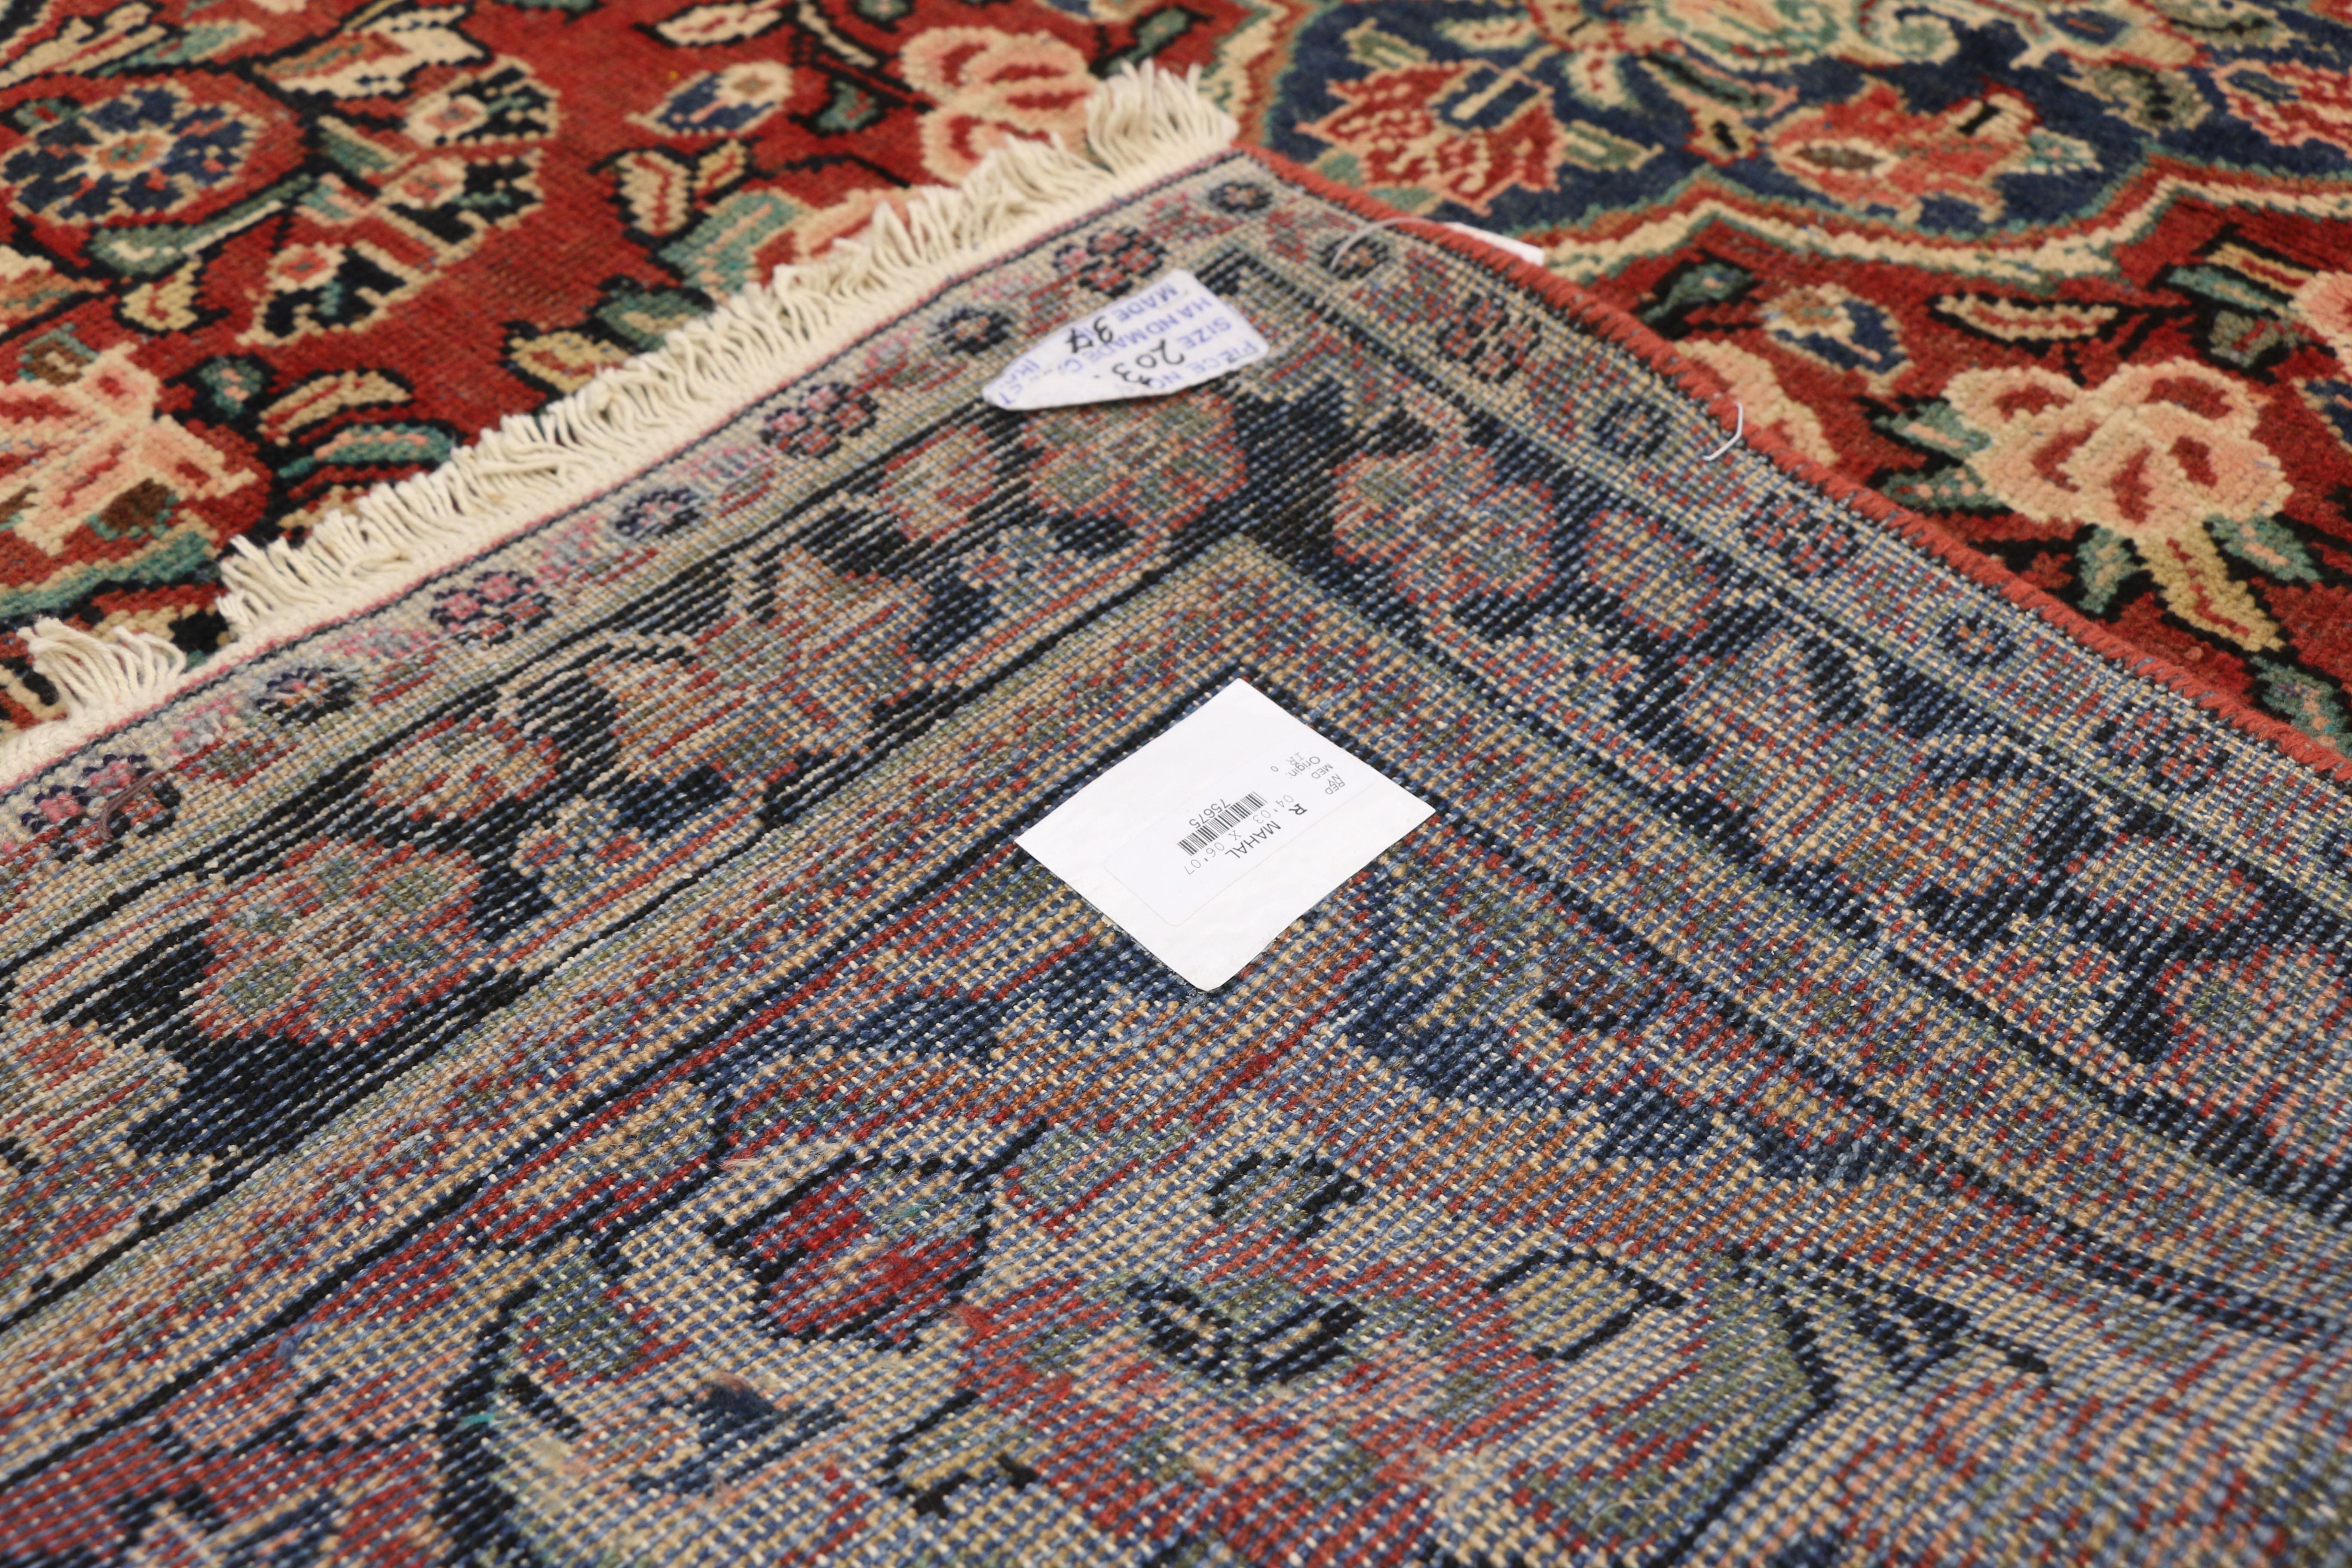 Hand-Knotted Vintage Persian Mahal Sarouk Rug with Rustic English Country Style, Entry Rug